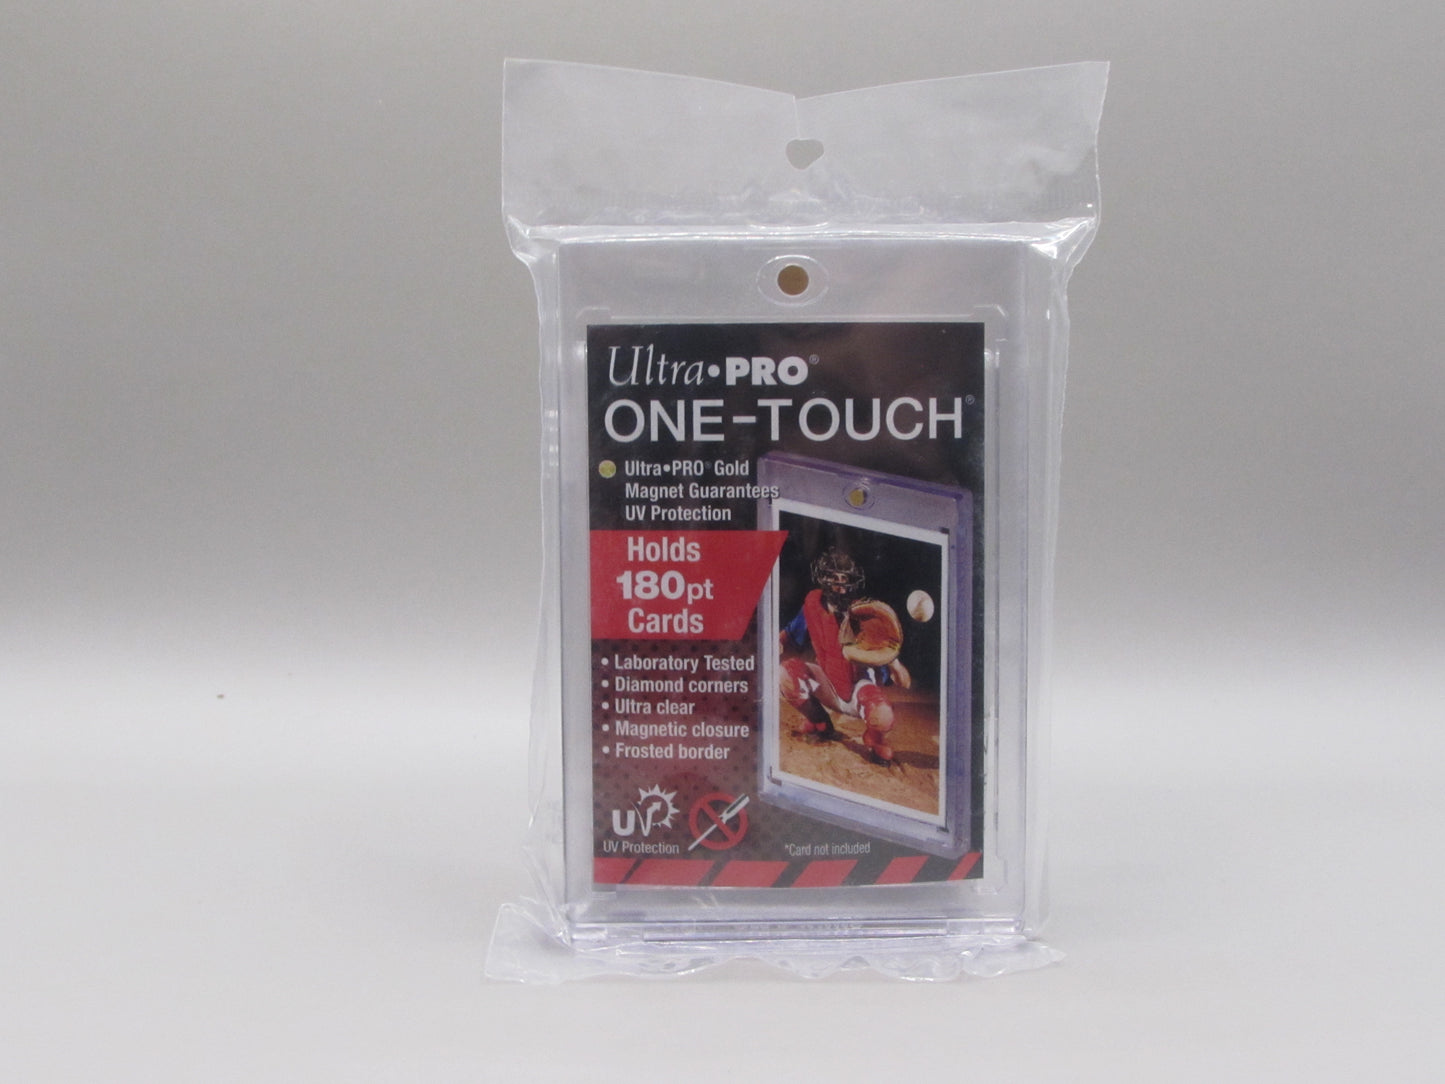 Ultra pro 180pt one-touch